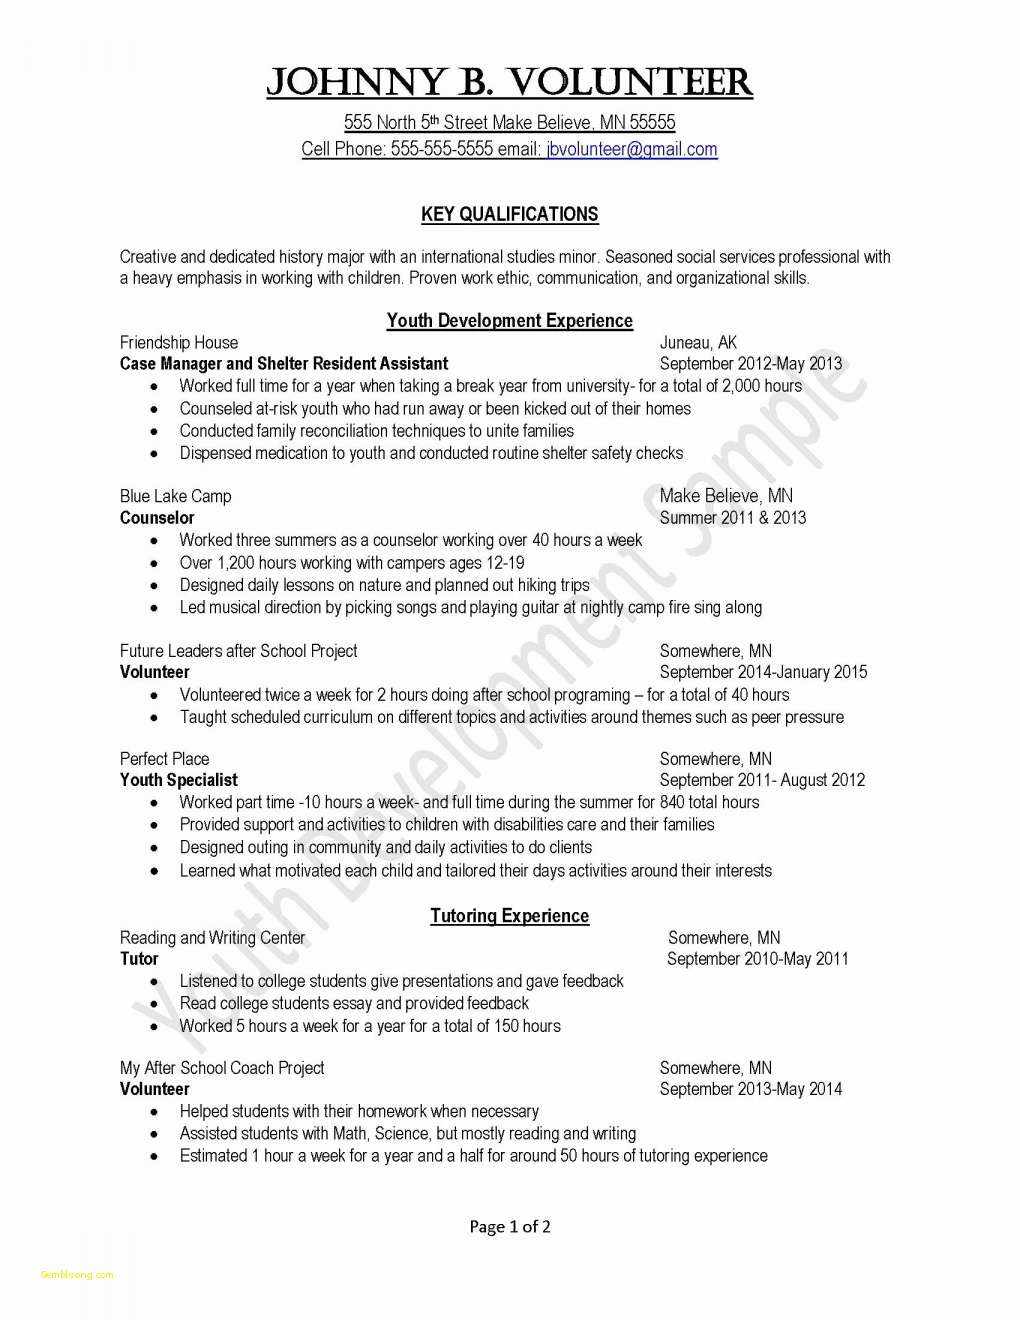 modern cover letter template example-Free Resume Templates for Students or Cover Letter Template Modern Copy Od Consultant Cover Letter Web 12-g